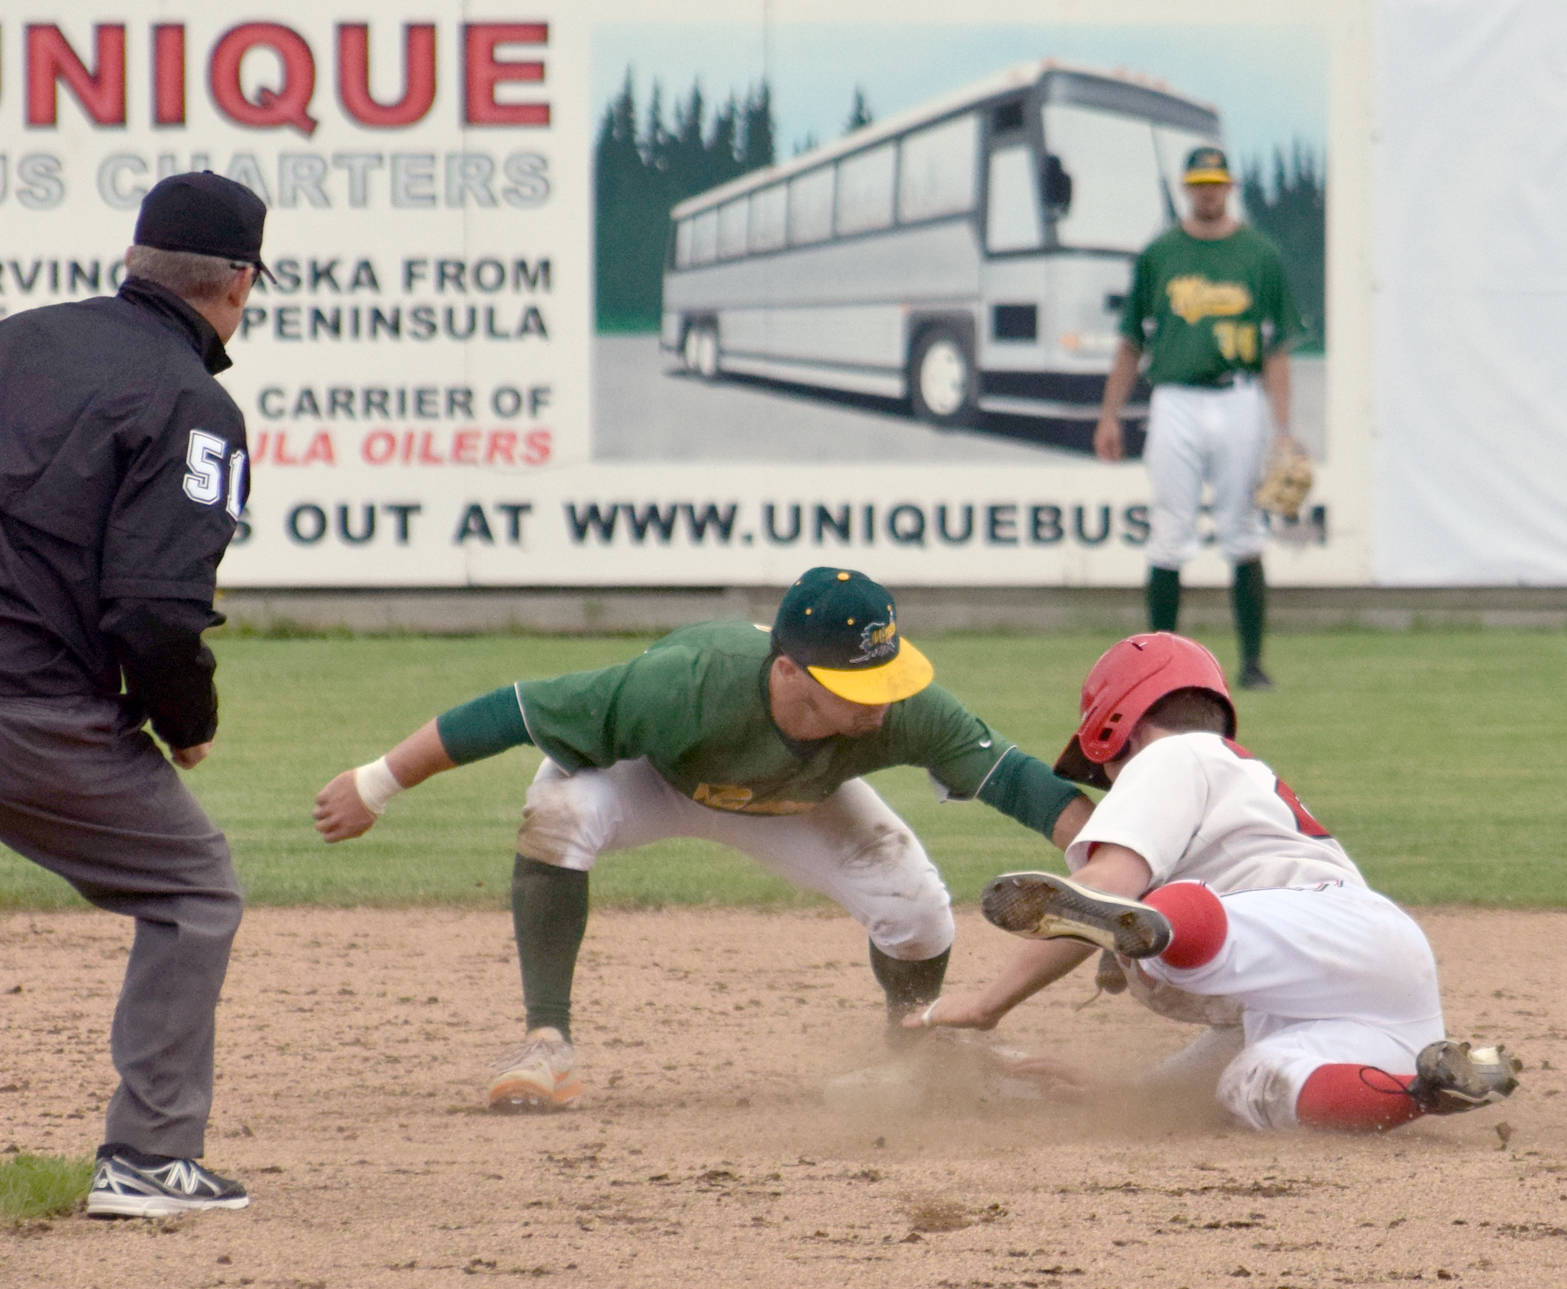 Oilers’ Kellen Strahm slides under the tag of Miners second baseman Brandon Chinea for a stolen base in the bottom of the third inning of Game 2 of the doubleheader Sunday, June 11, 2017, at Coral Seymour Memorial Park in Kenai. (Photo by Jeff Helminiak/Peninsula Clarion)